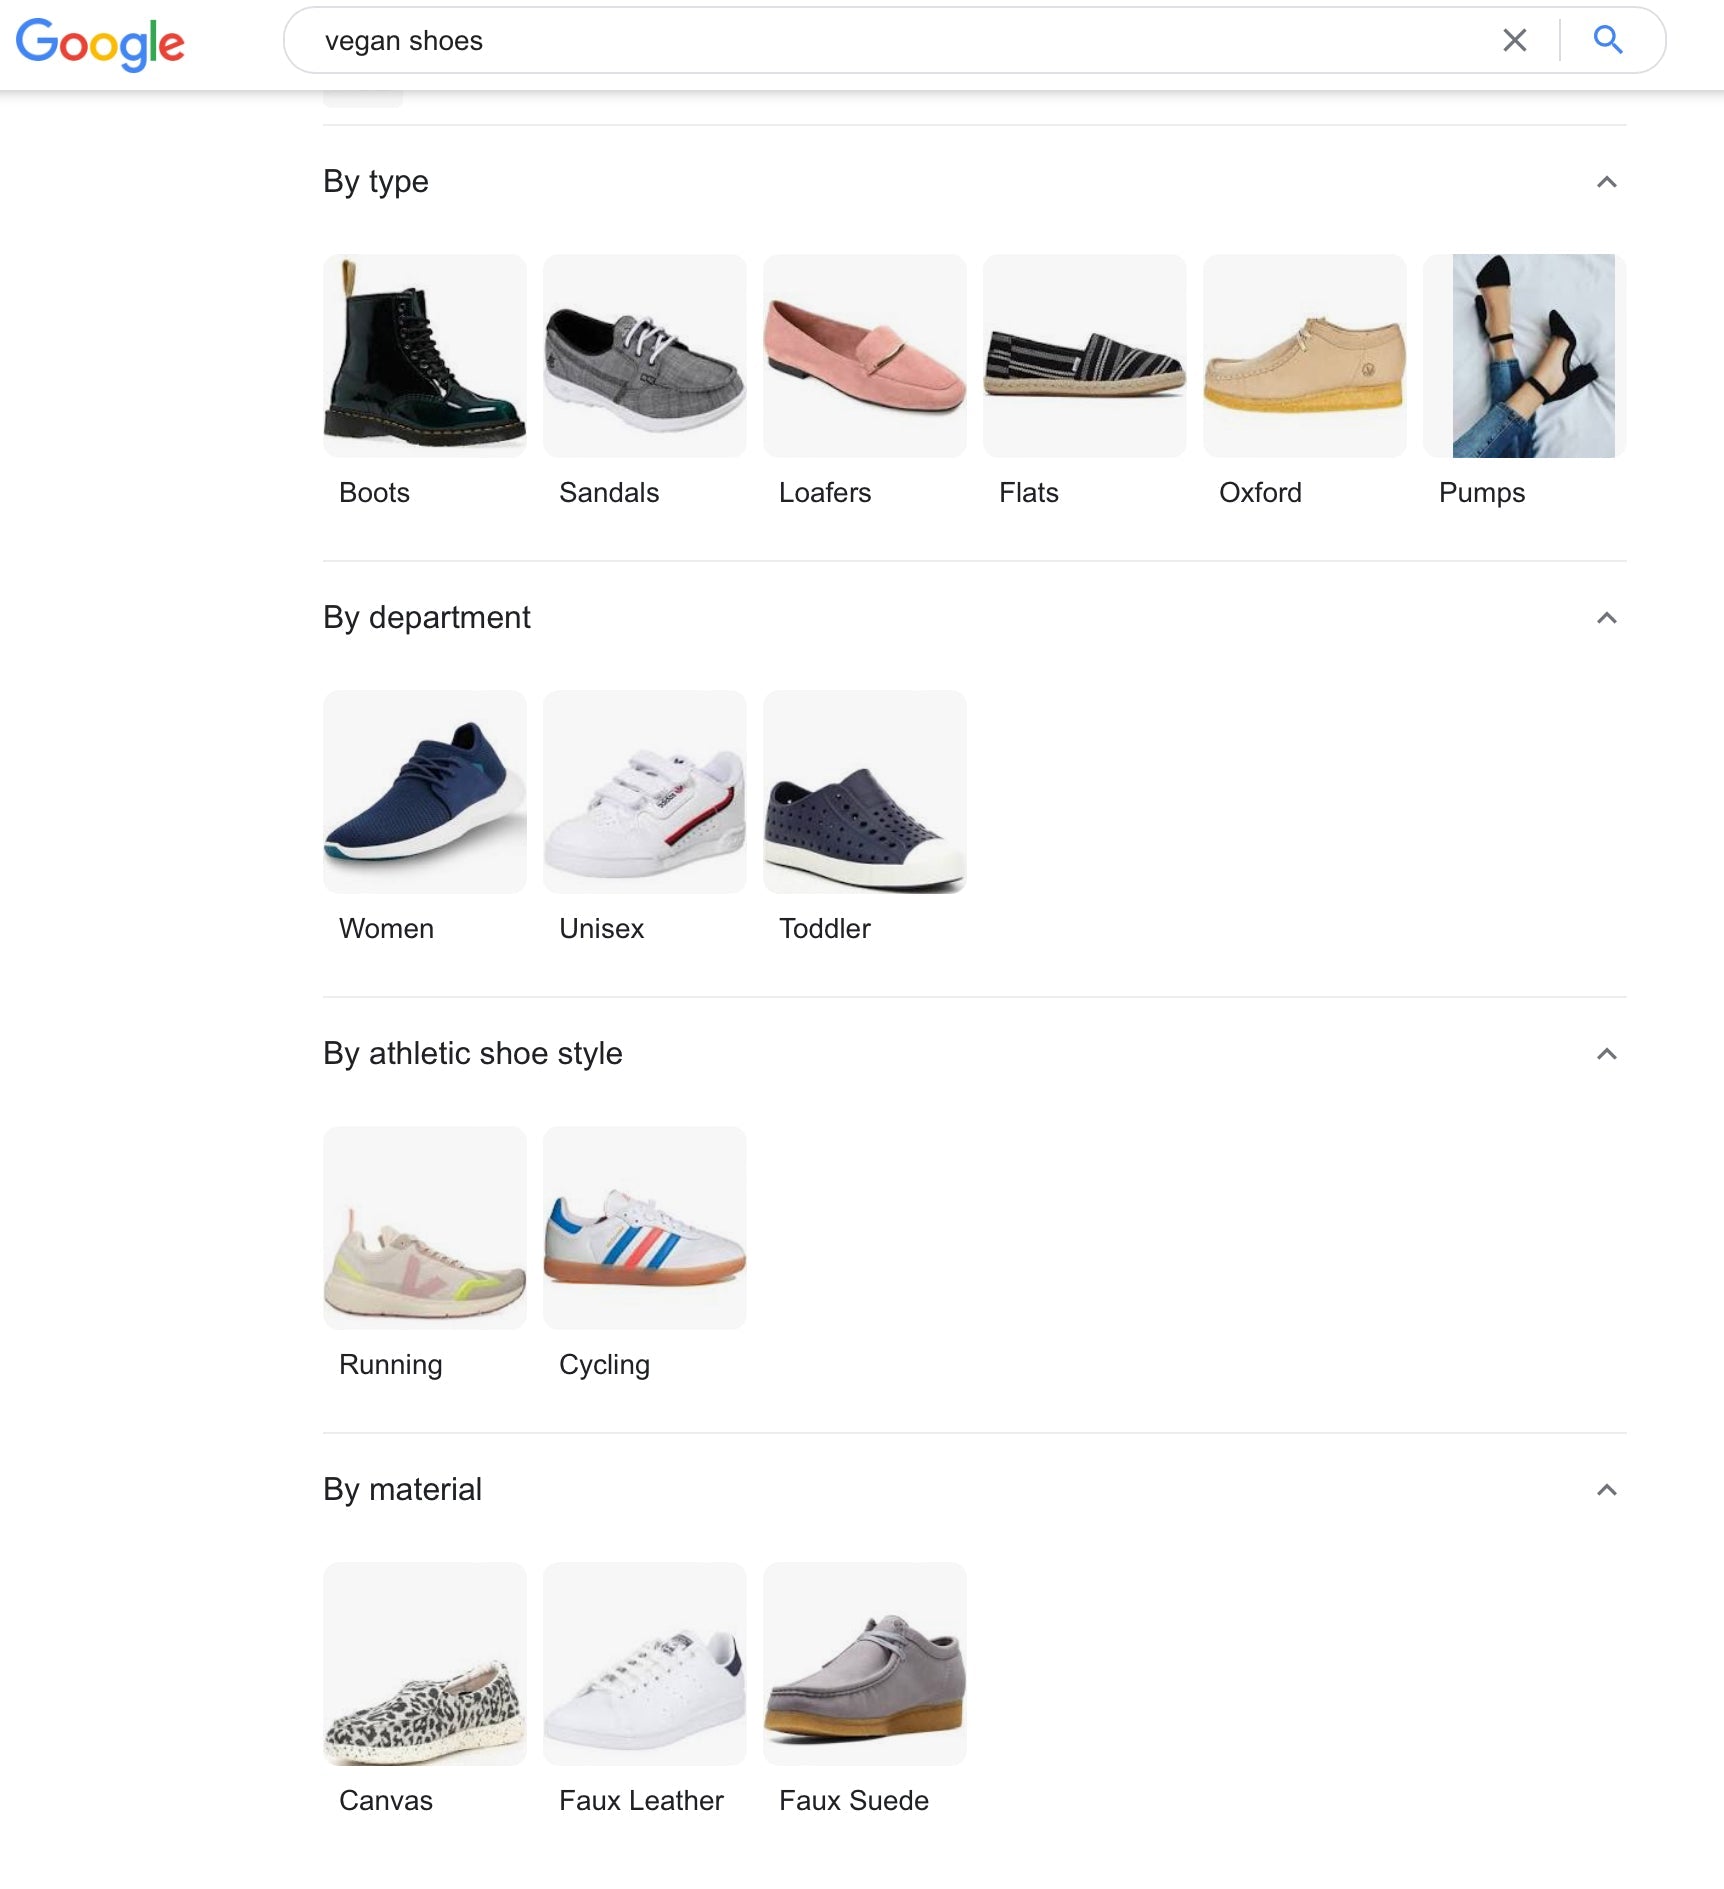 Image of Google search results for vegan shoes